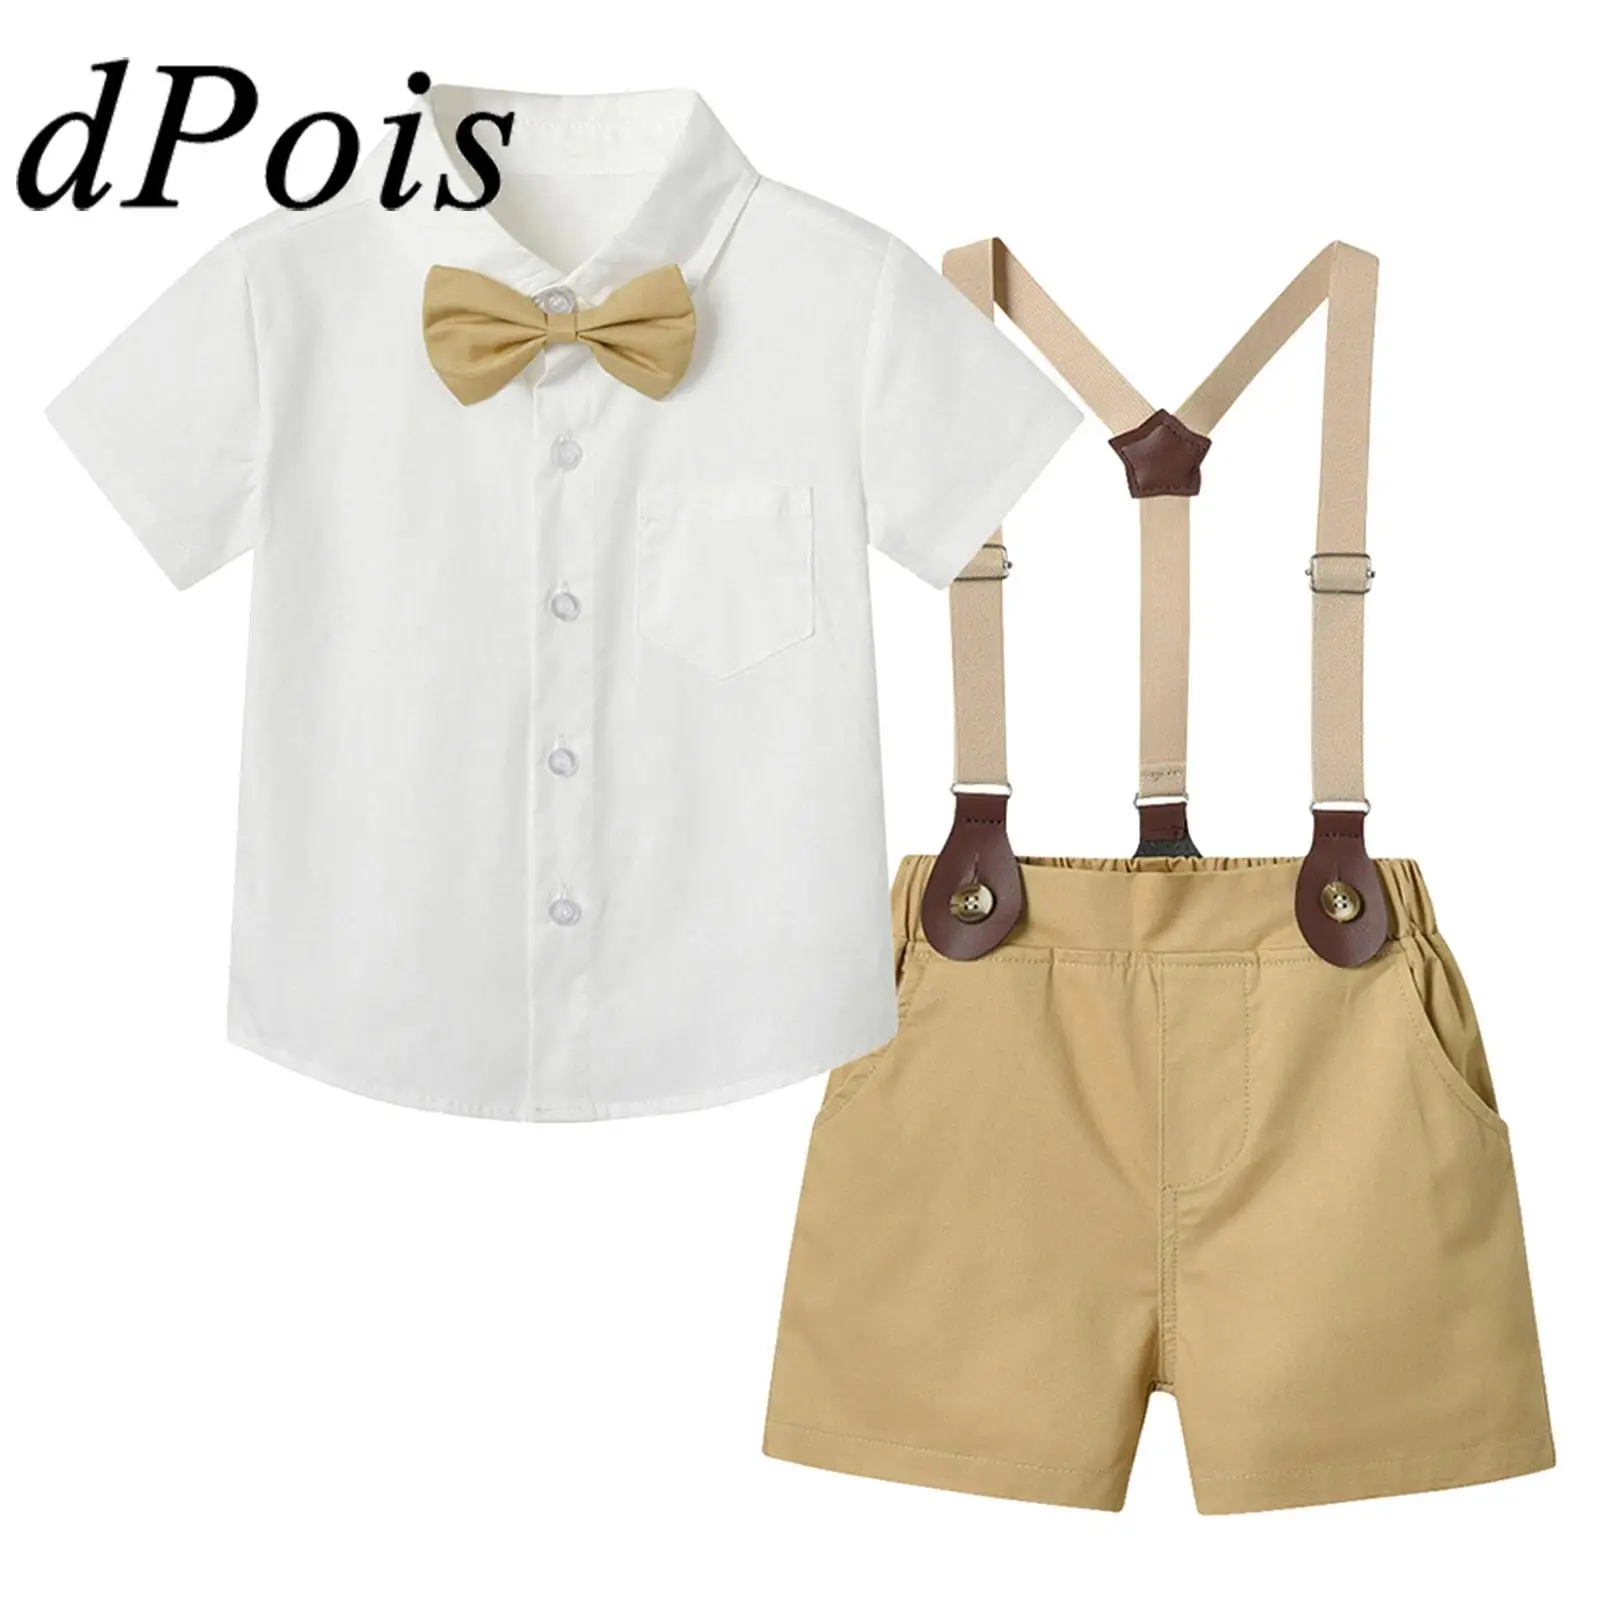 

Todder Boys Gentleman Two-Piece Outfit Short Sleeve Shirt with Bow Suspenders Shorts Sets for Birthday Party School Uniforms